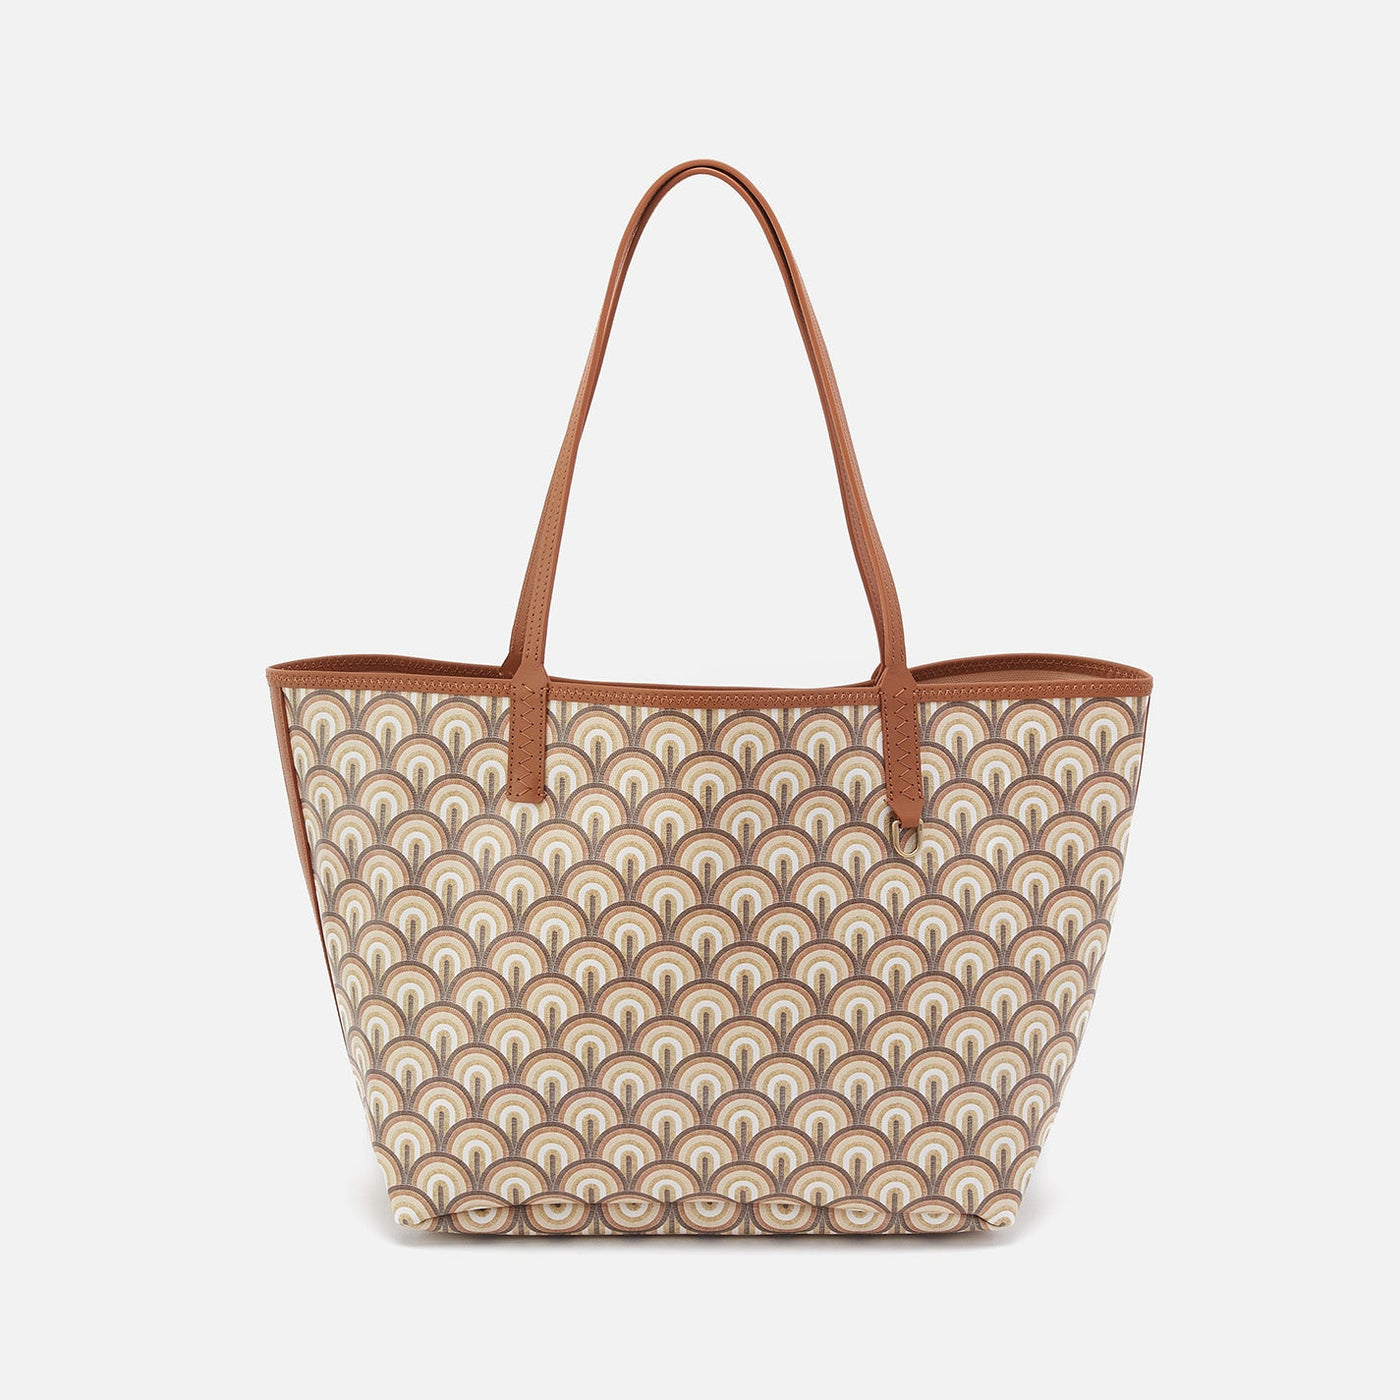 All That Tote in Coated Canvas - Caramel Whip